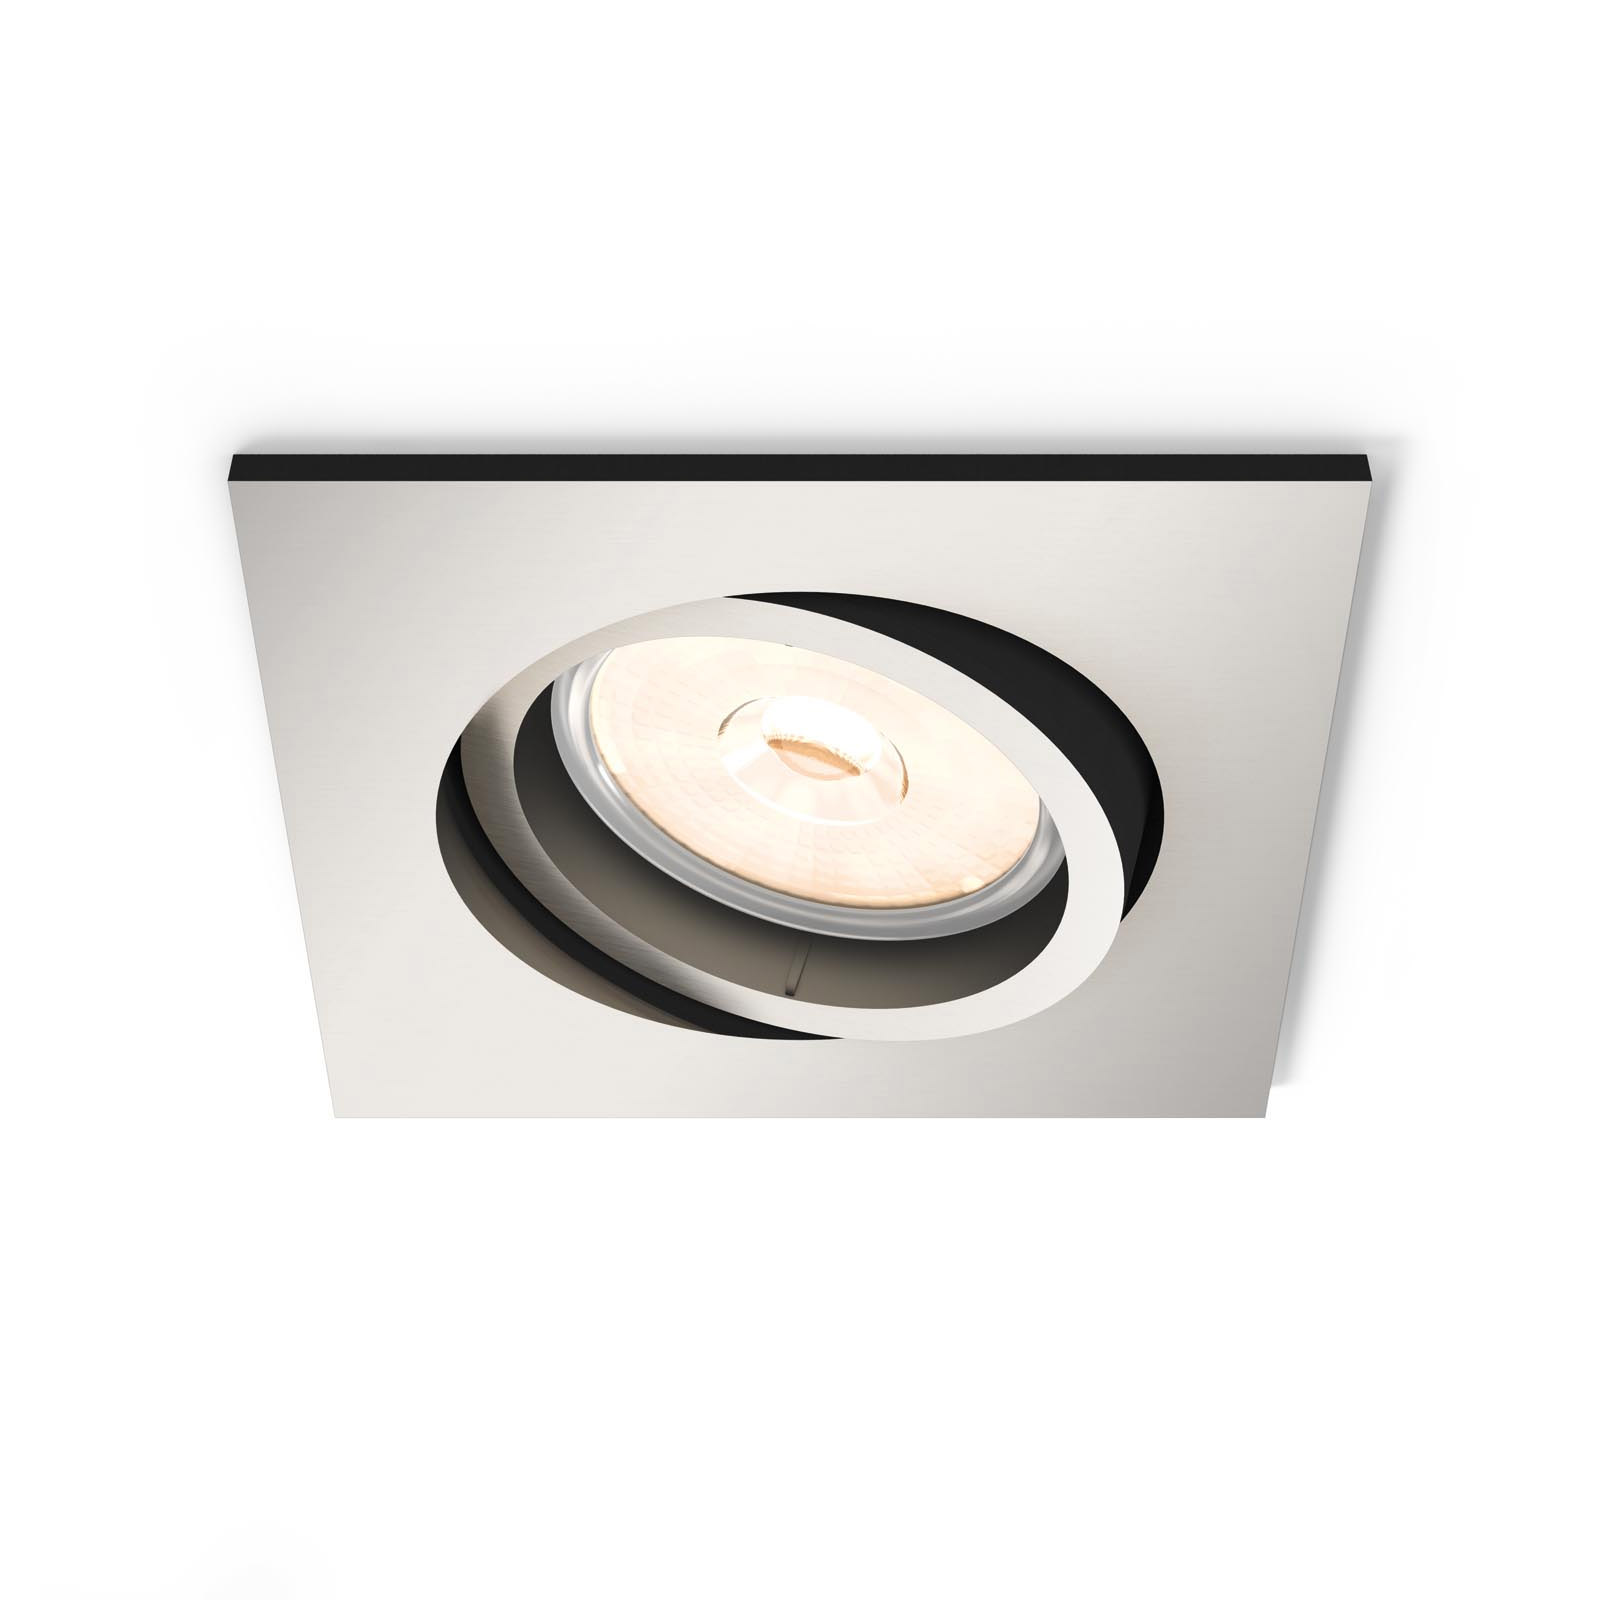 Philips myLiving LED spot Donegal square silver